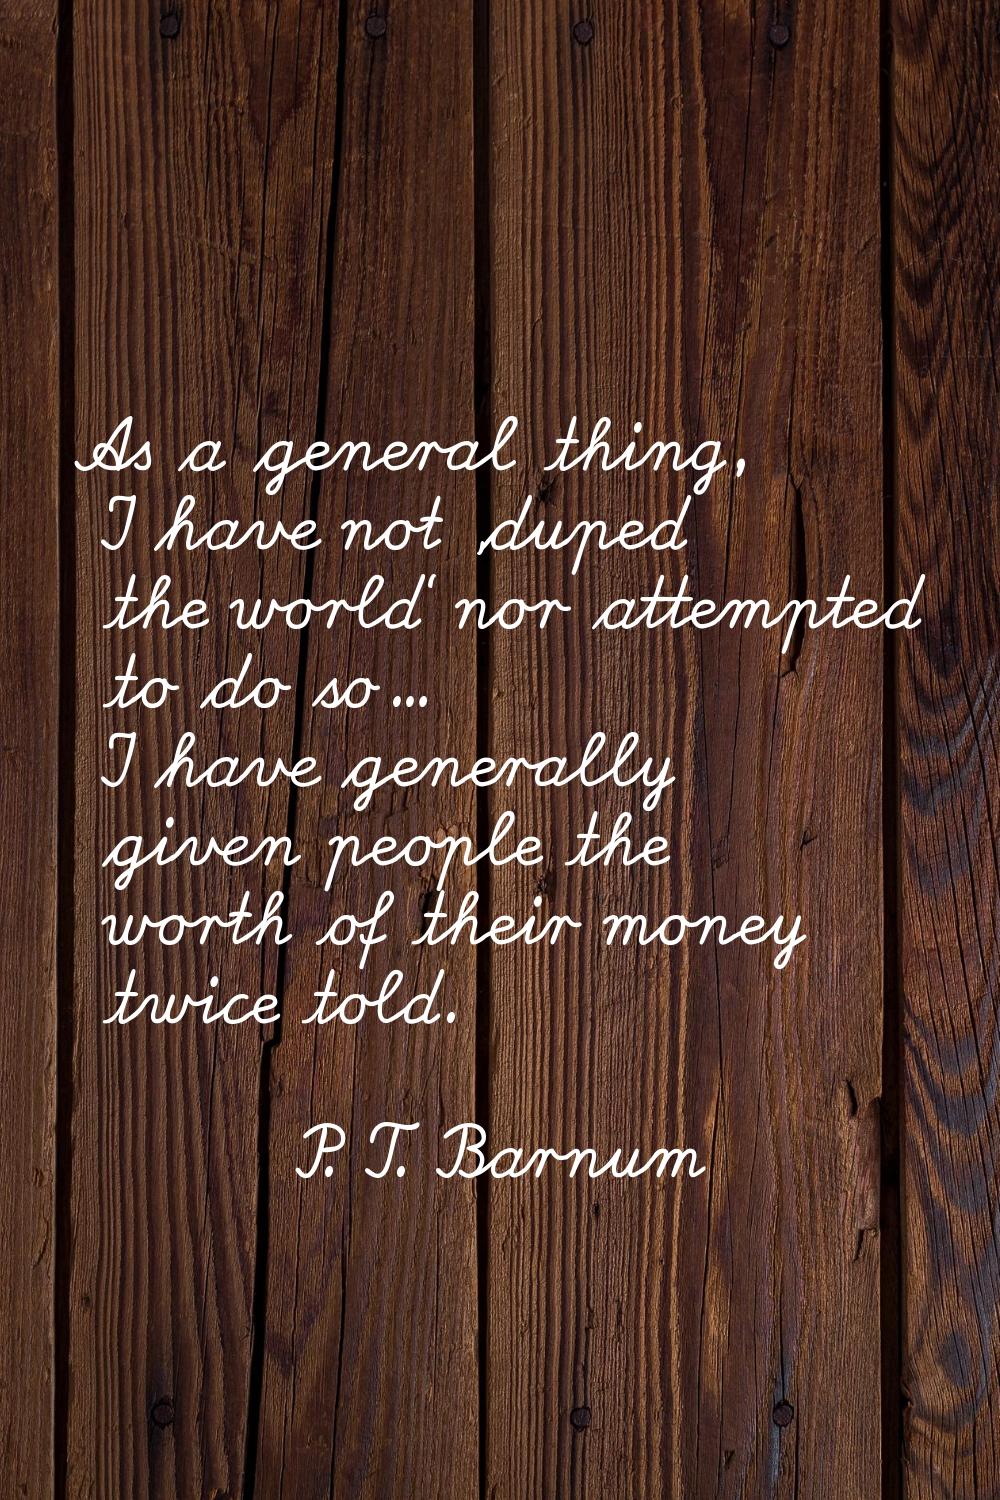 As a general thing, I have not 'duped the world' nor attempted to do so... I have generally given p